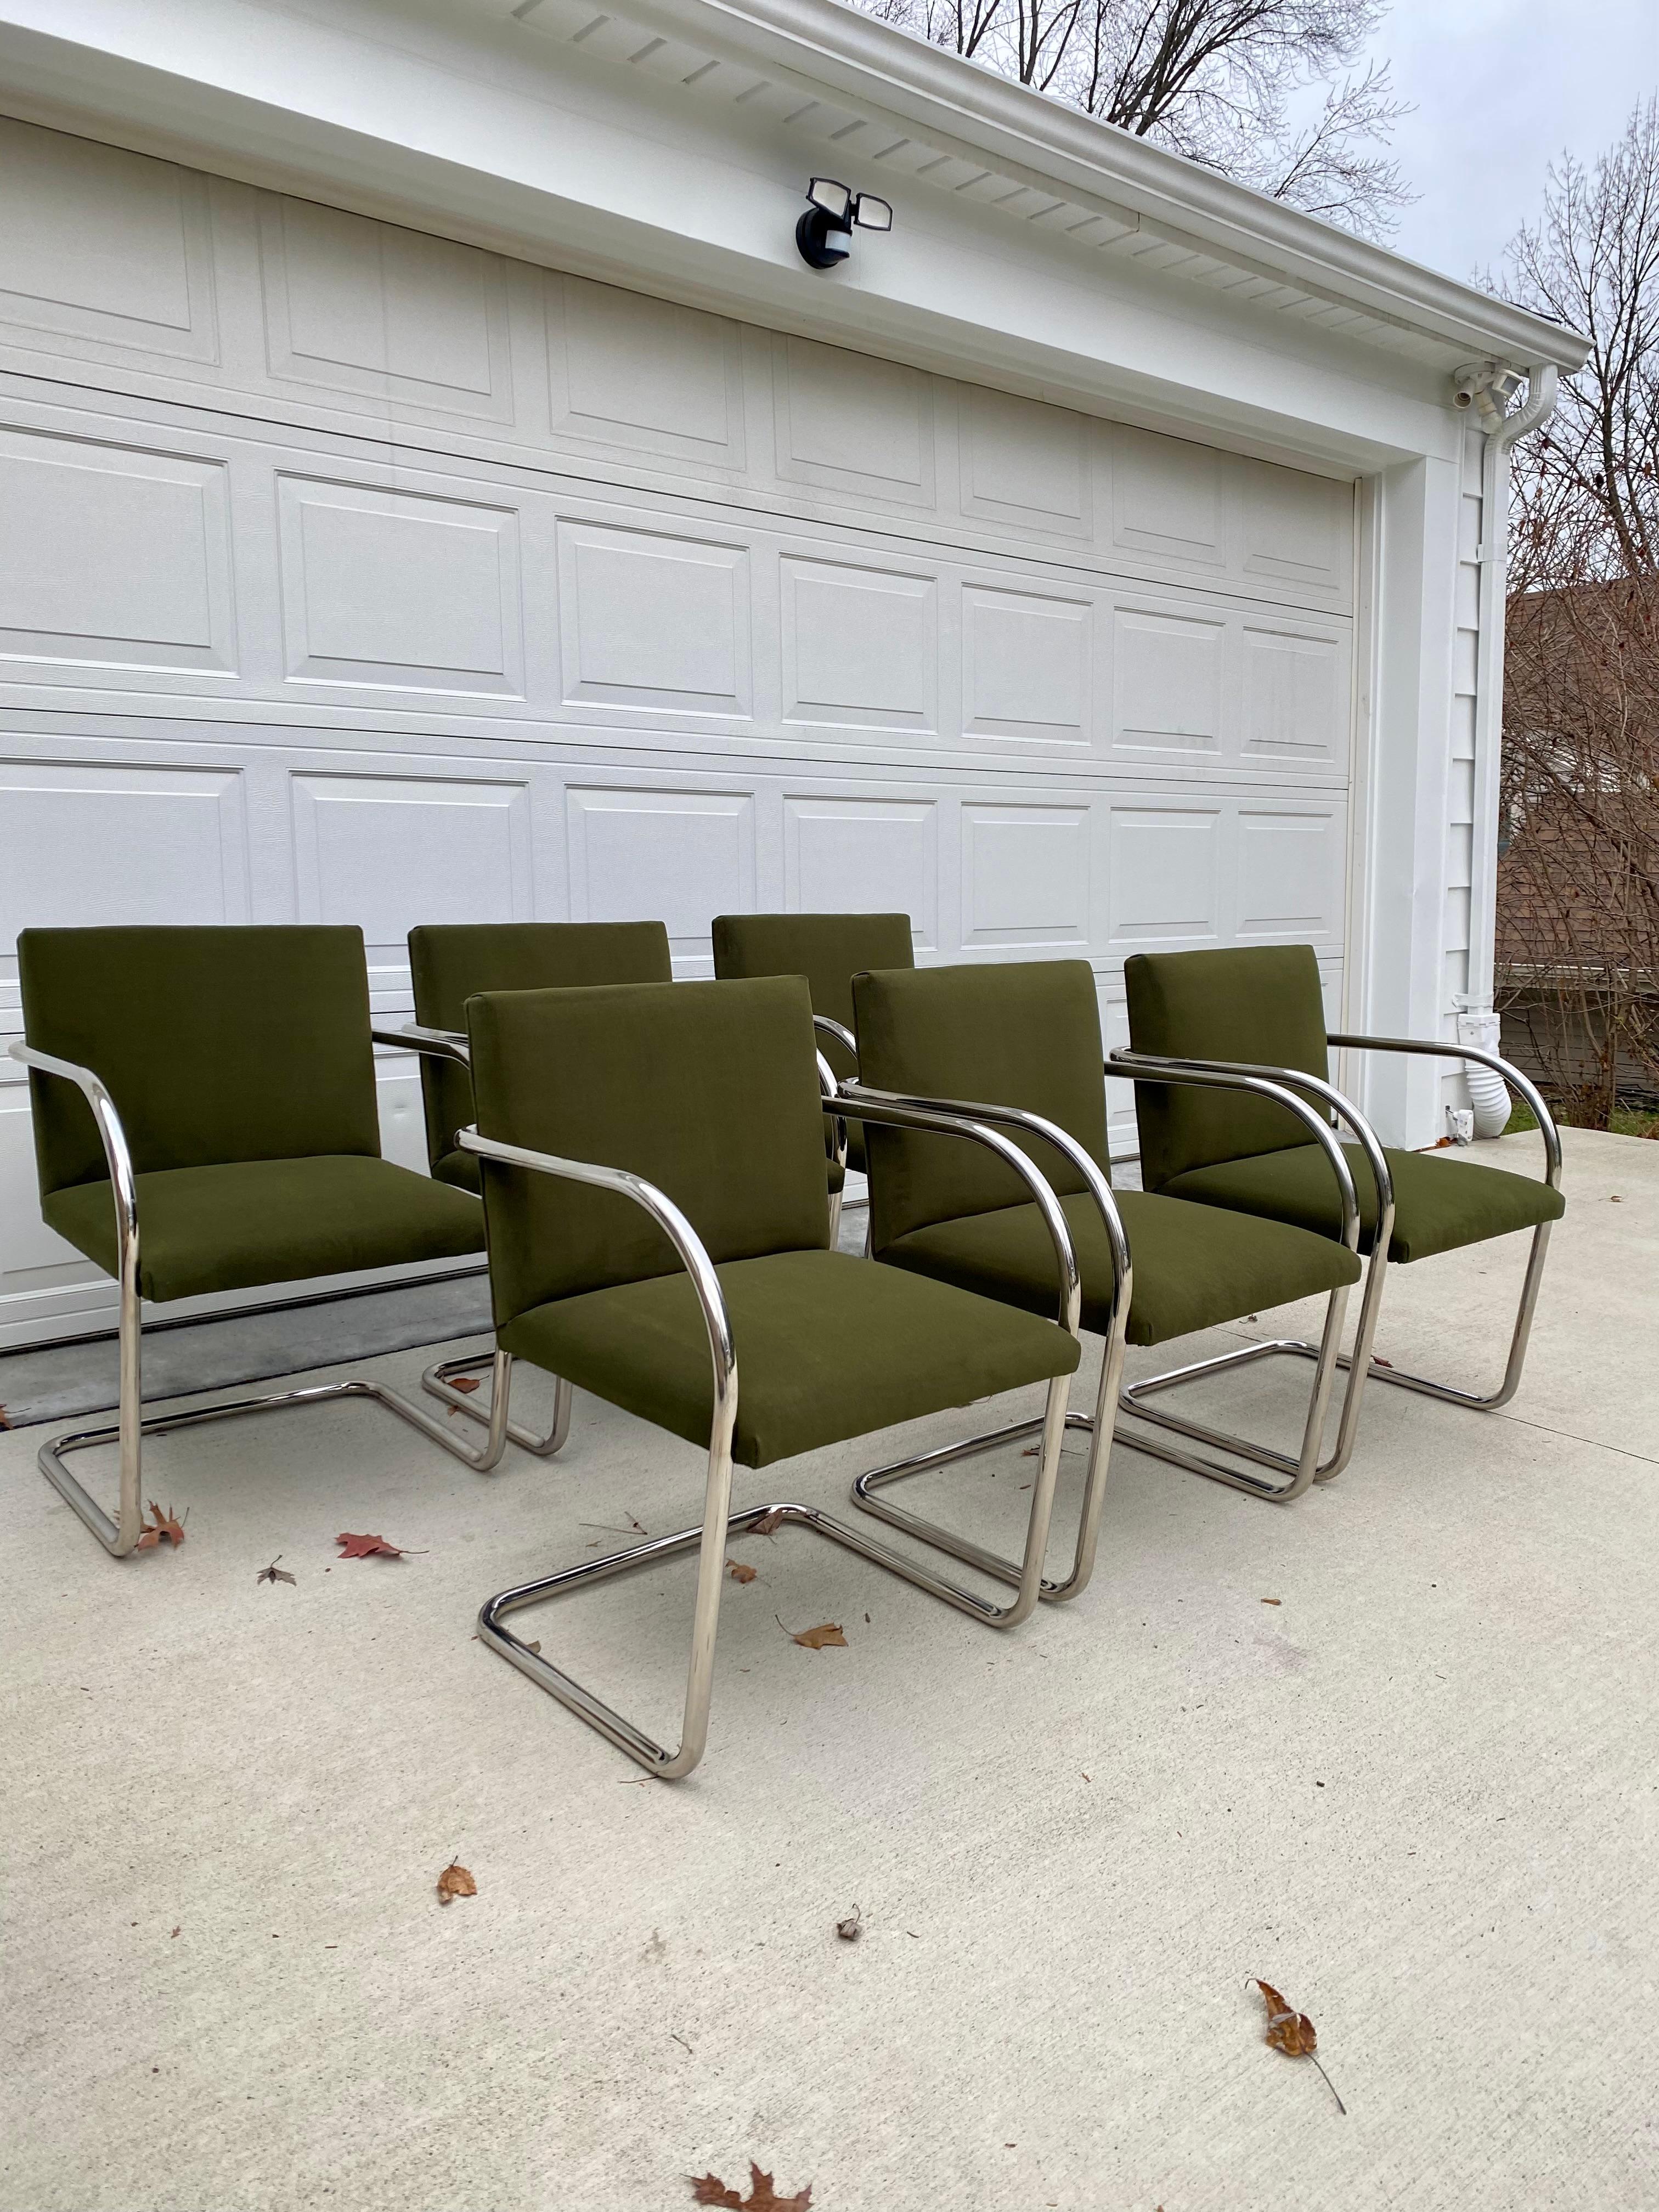 Set of 6 Chrome Mies Van Der Rohe Tubular Brno Chairs by Knoll in Green Velvet In Good Condition For Sale In Medina, OH